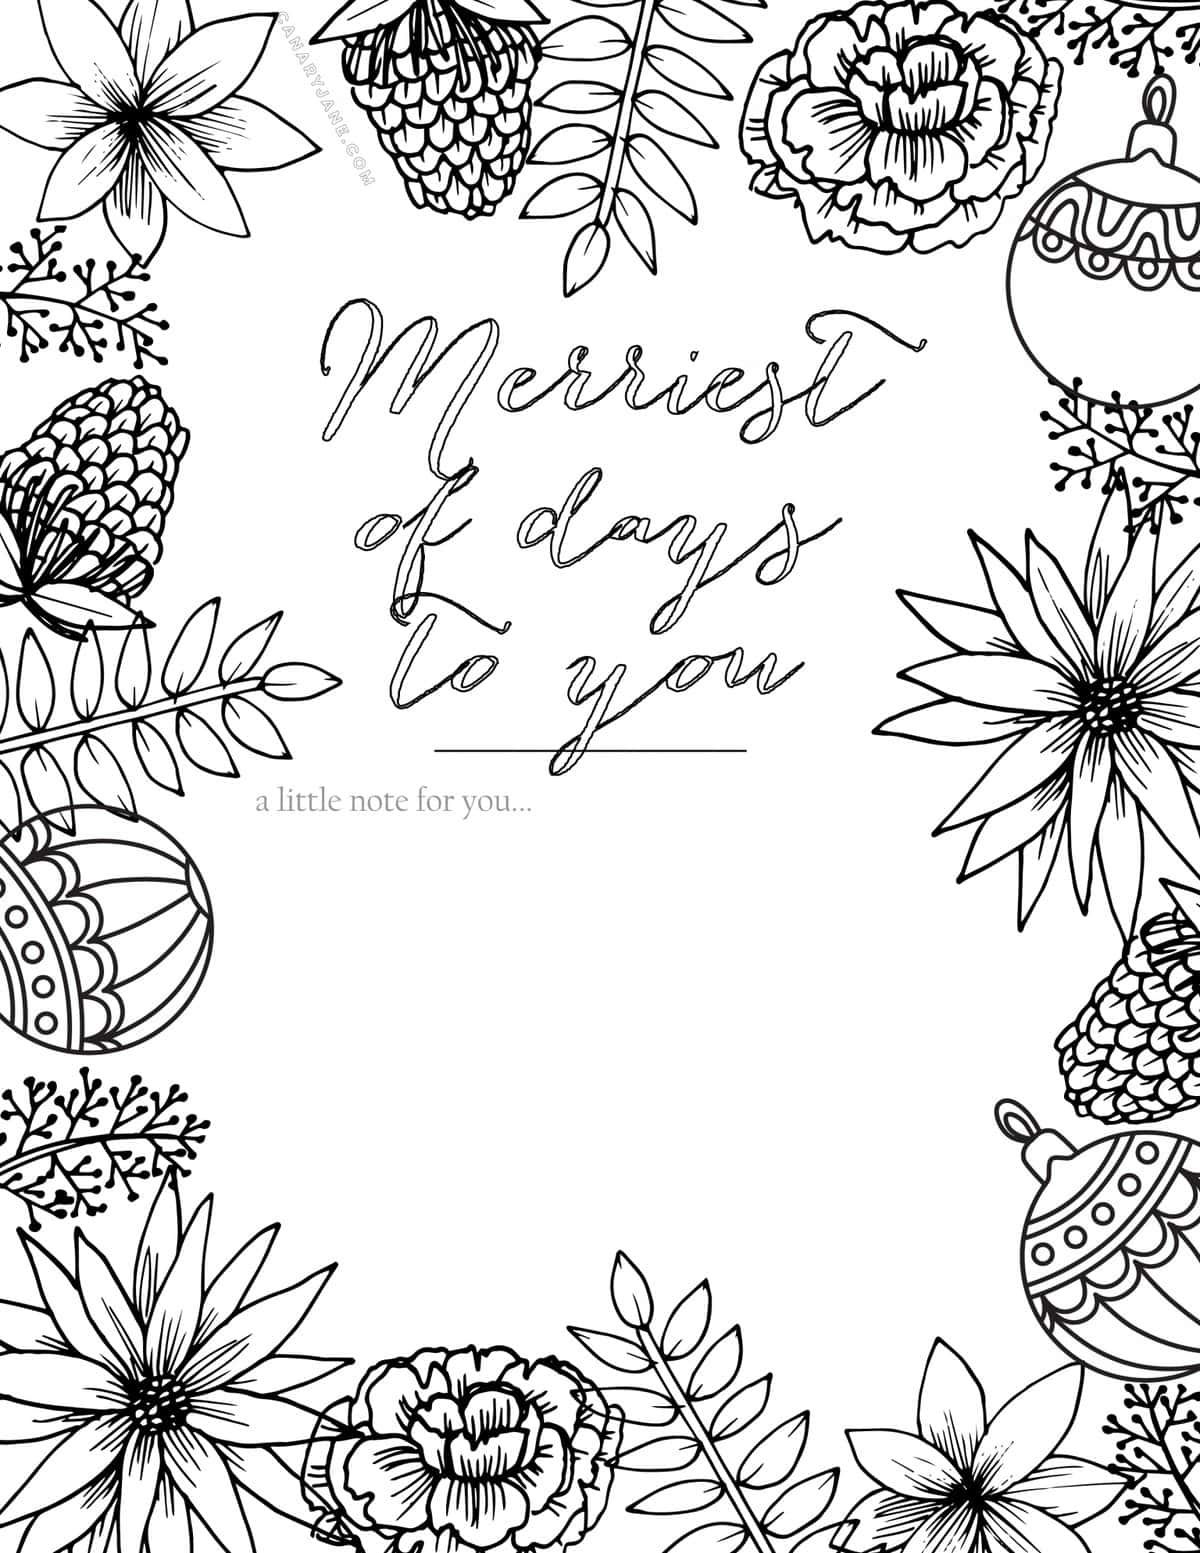 Free Christmas Coloring Pages & Printables - Design Dazzle